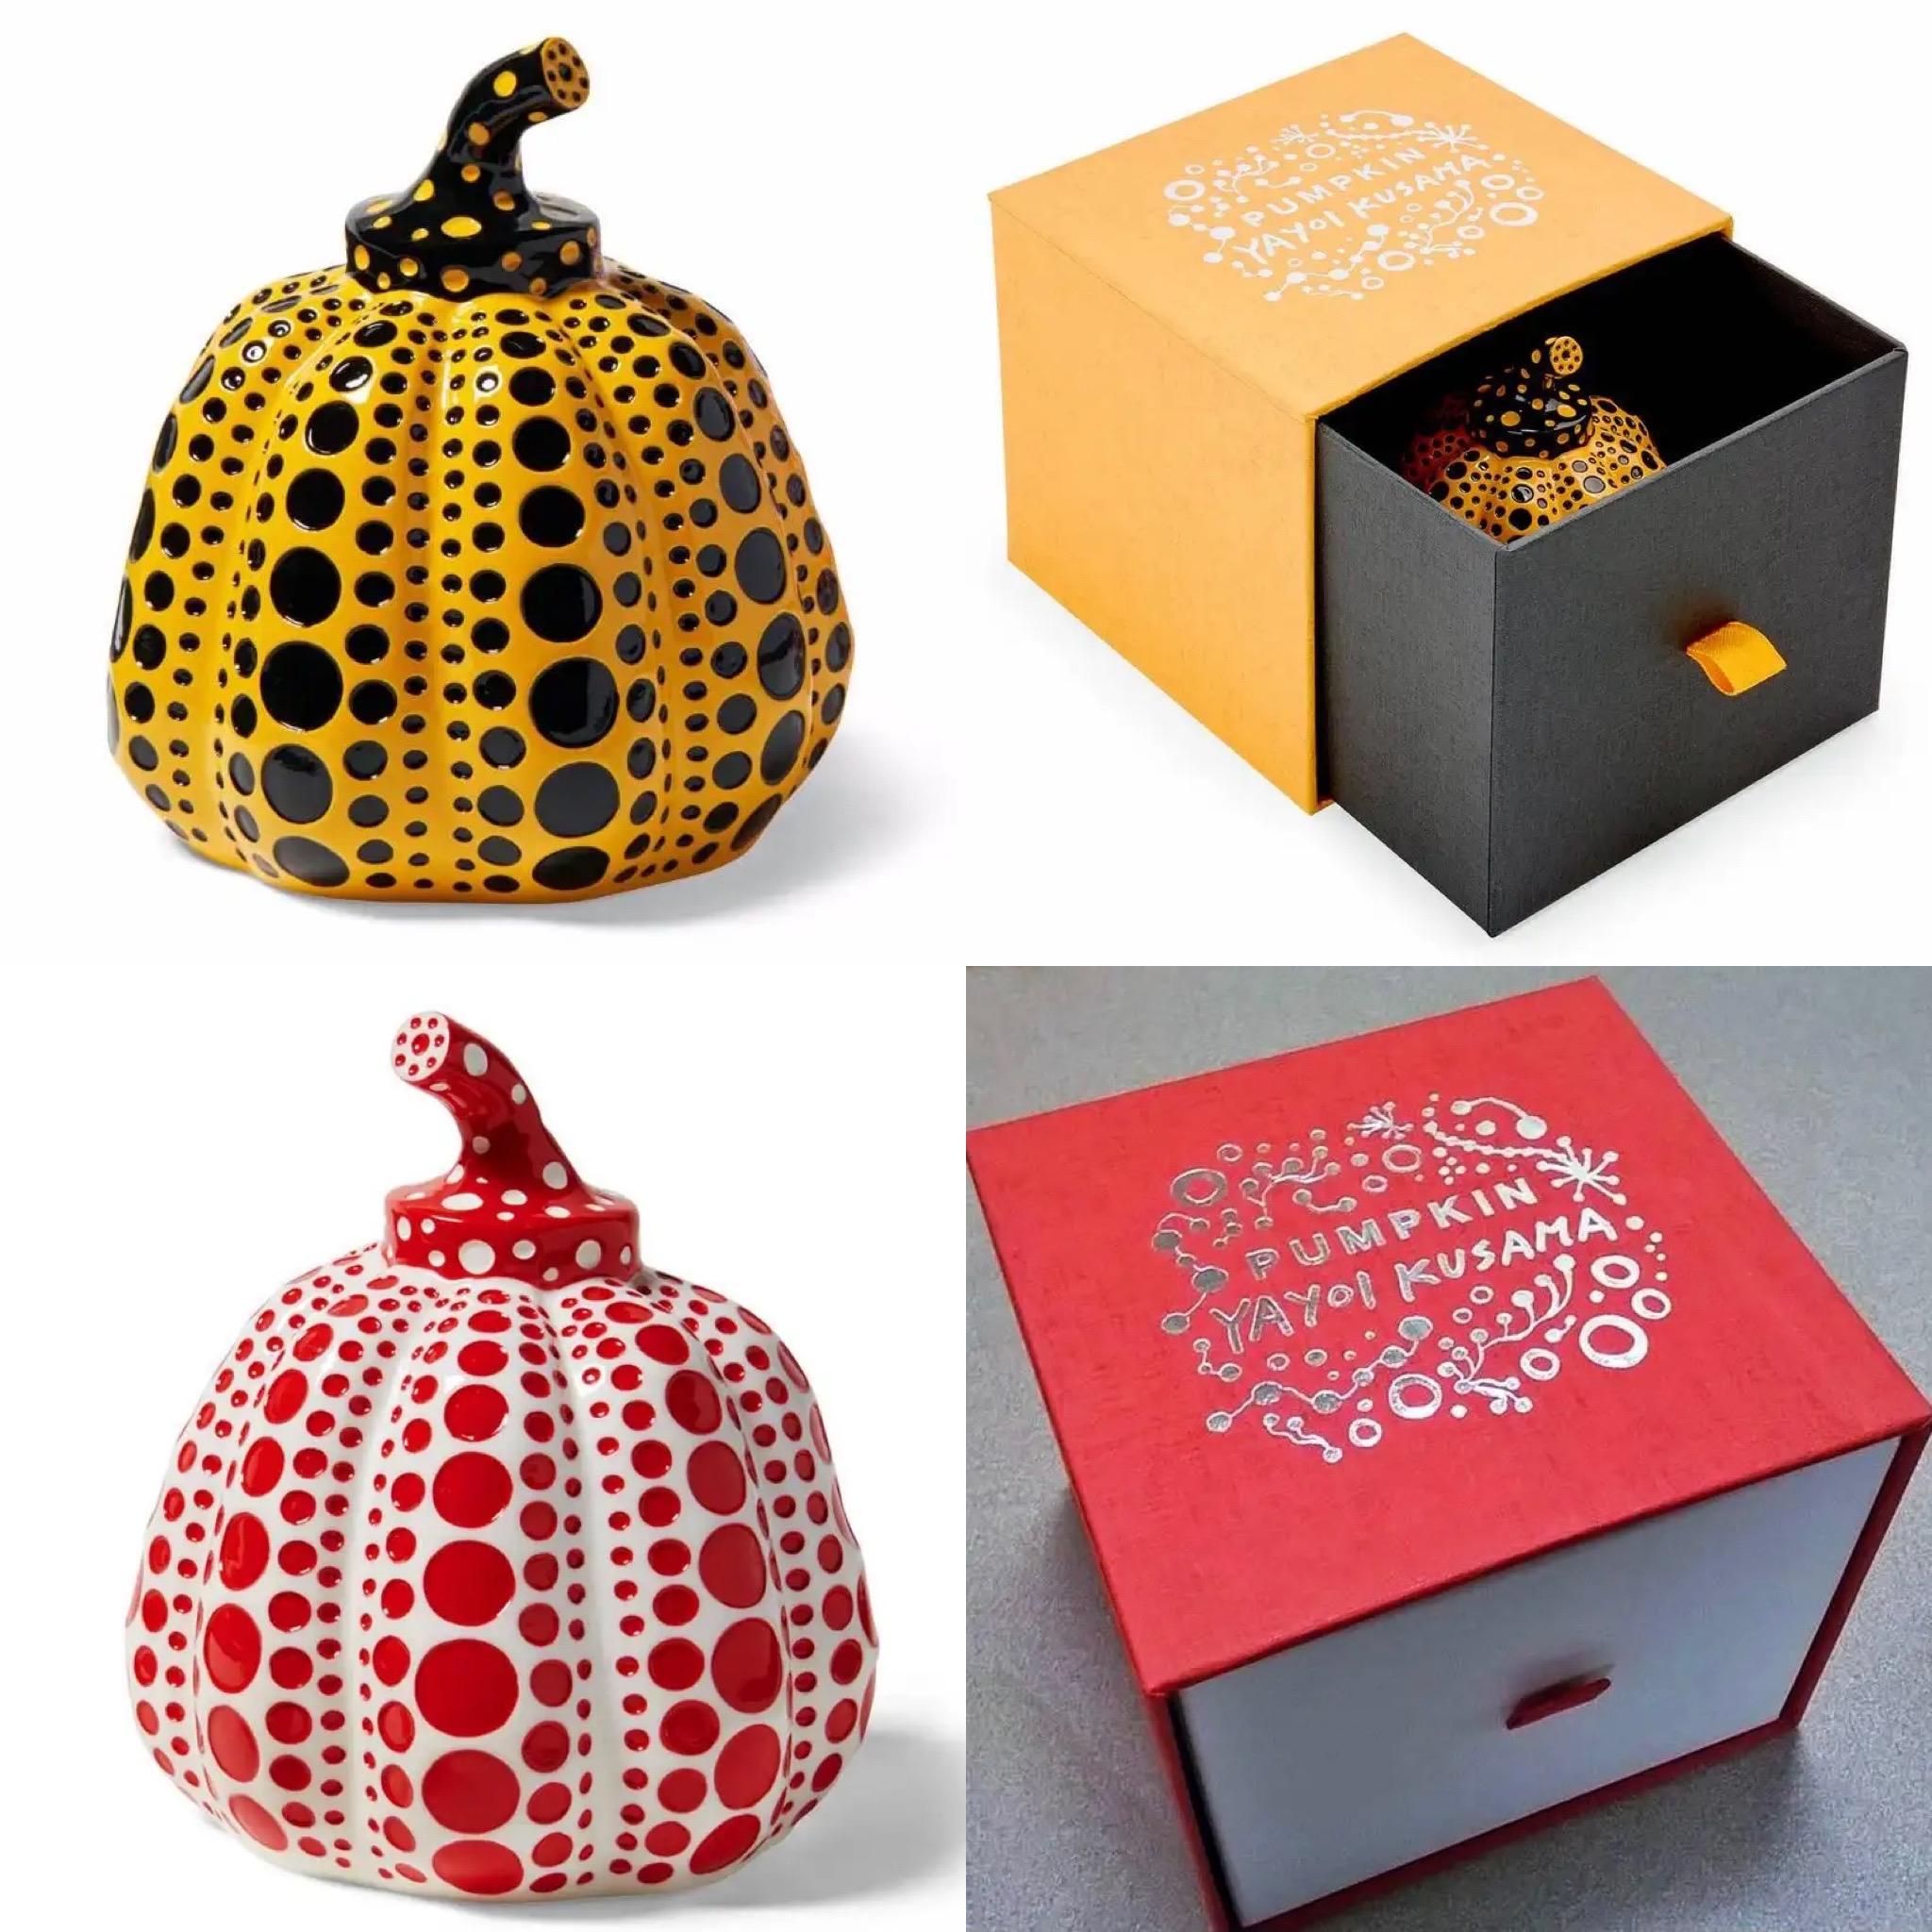 Yayoi Kusama Set of Two Pumpkins: Yellow and Black / Red and White c. 2015:
An iconic, vibrantly colored pop art set - these small Kusama pumpkin sculptures feature the universal polka dot patterns and bold colors for which the artist is perhaps